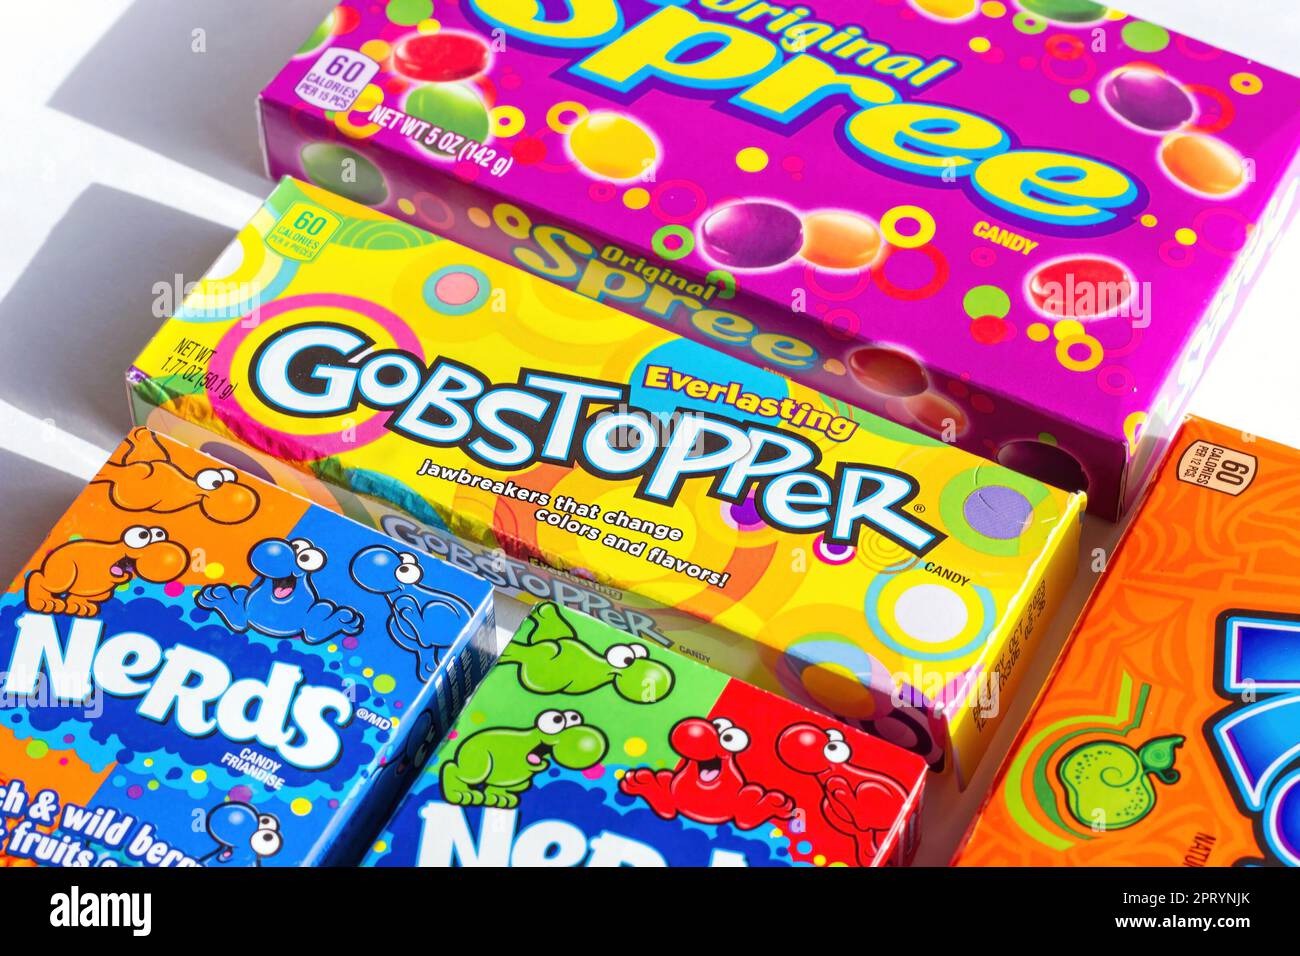 DUSHANBE, TAJIKISTAN - AUGUST 18, 2022: Different kinds of American sweet candies (Gobstopper, Spree, Runts, Nerds) packs. Stock Photo